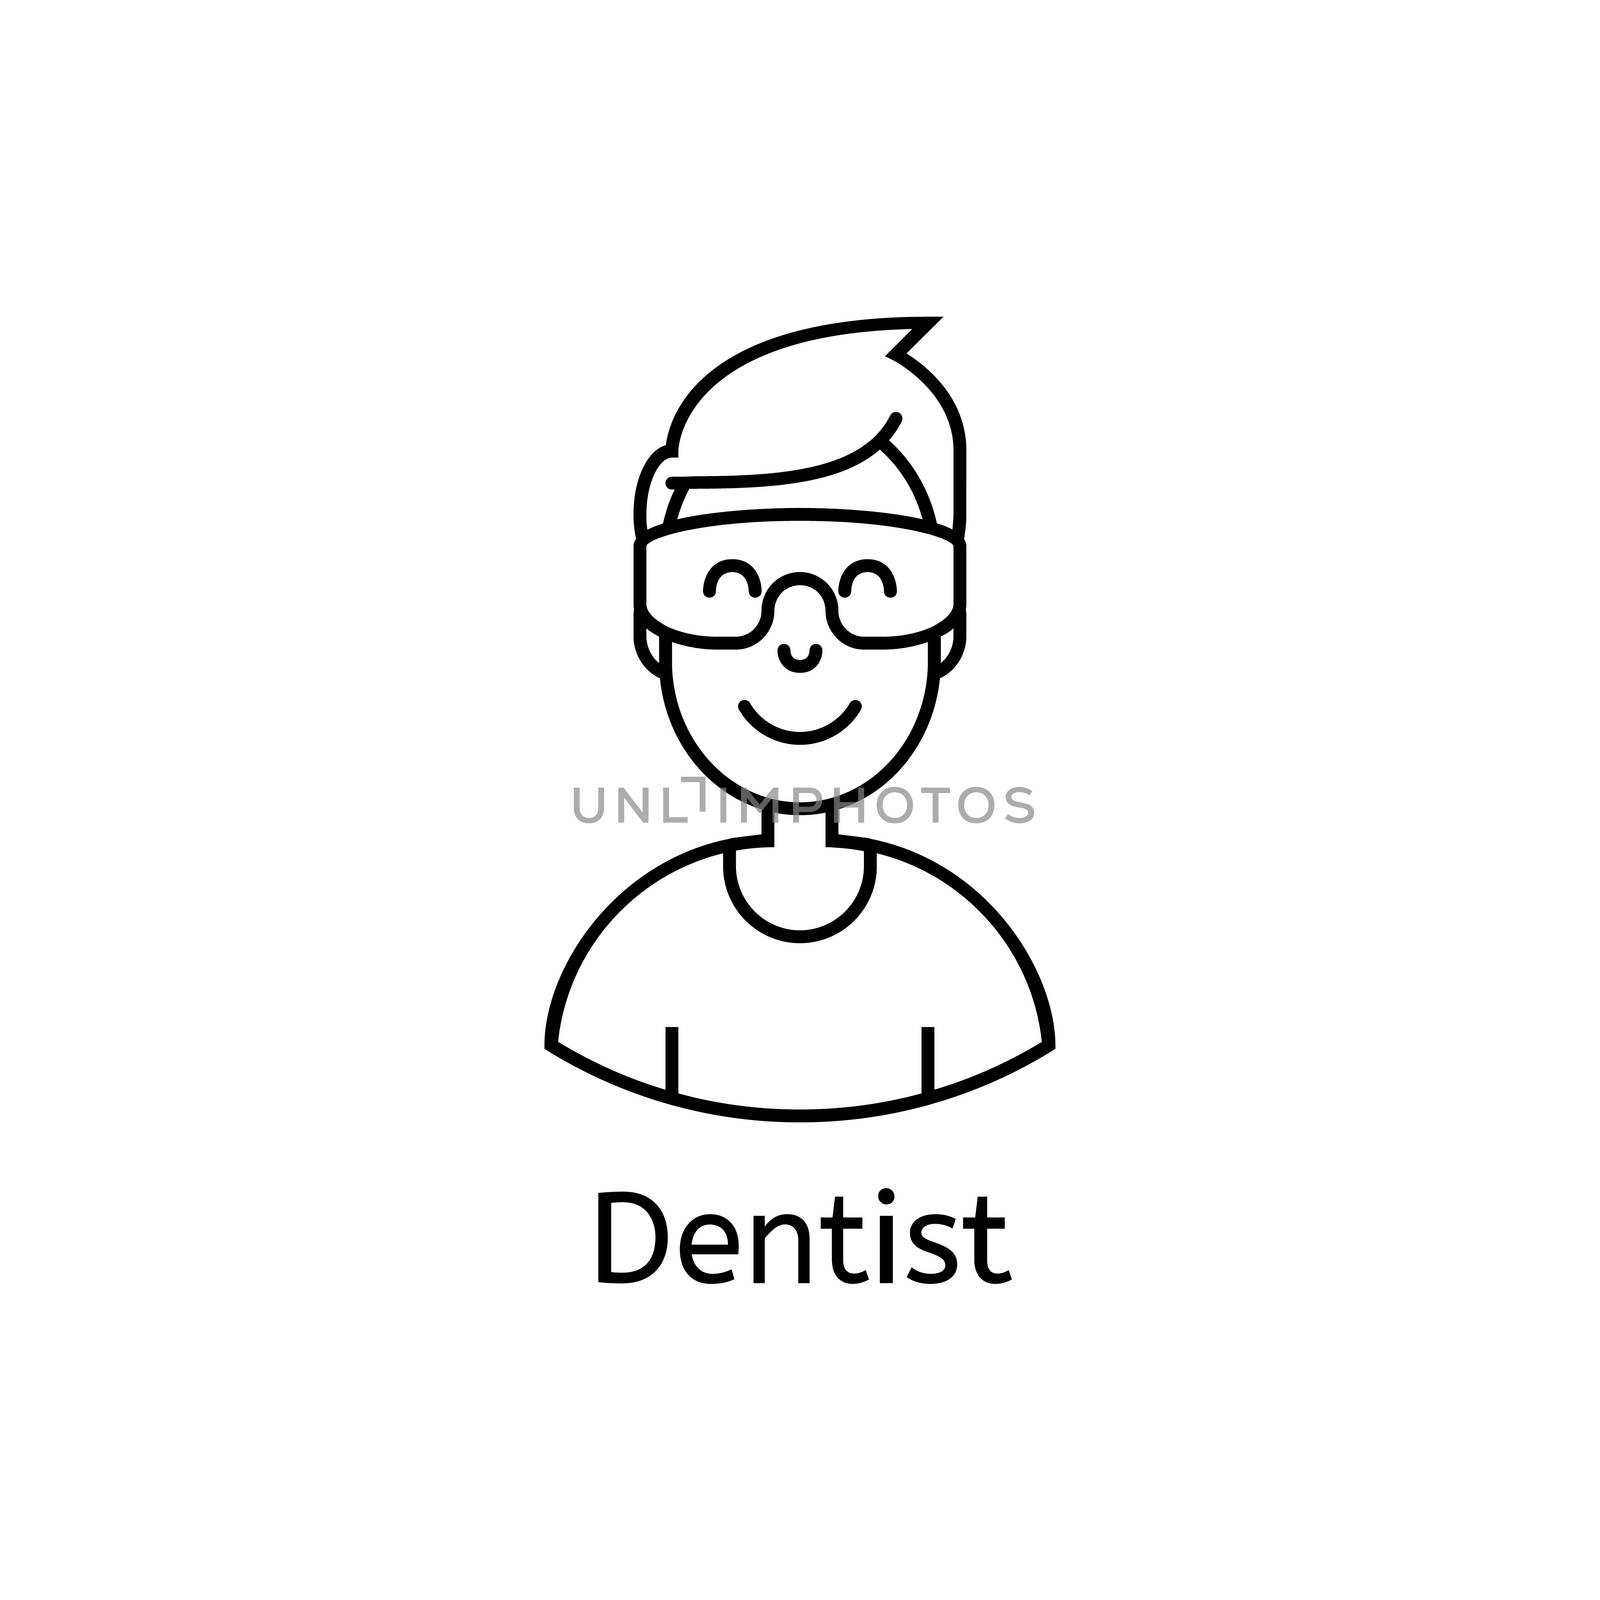 Medial happy doctor line icon. Medical health care icons figure thin linear signs for websites, infographic, mobile app. by Elena_Garder